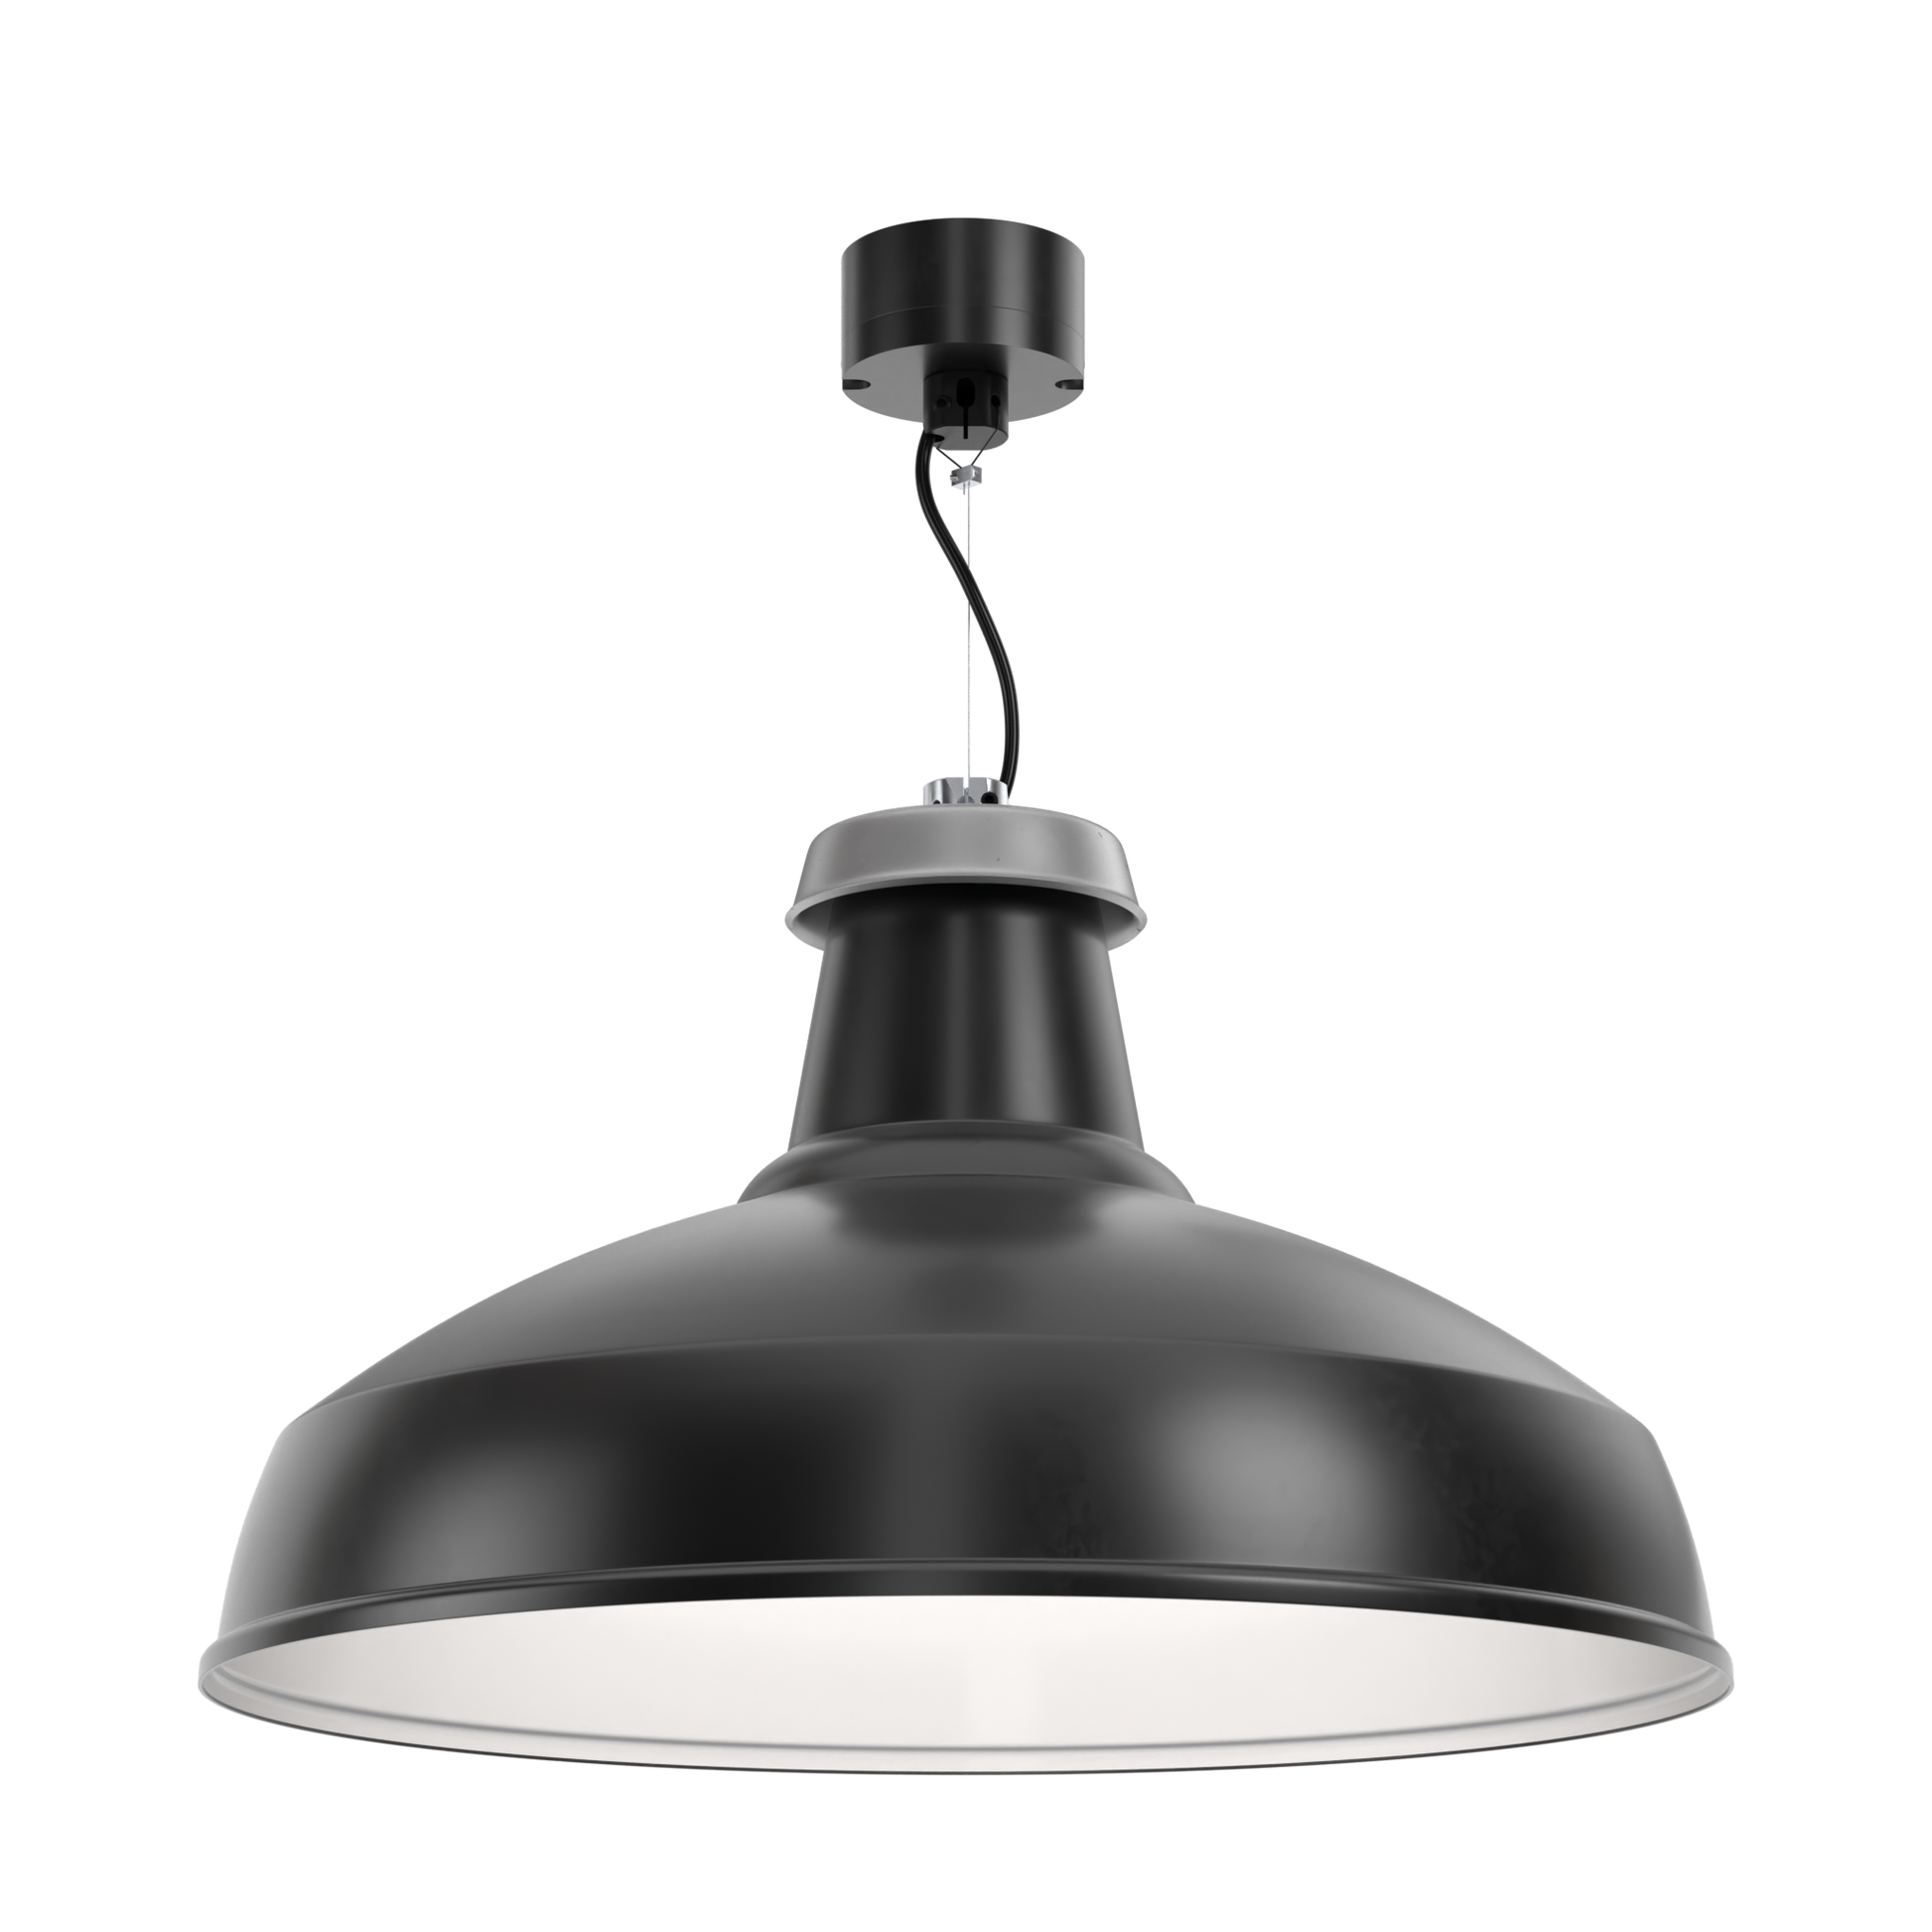 A sustainable architectural XL pendant light on a small monopoint that's designed for circular economy